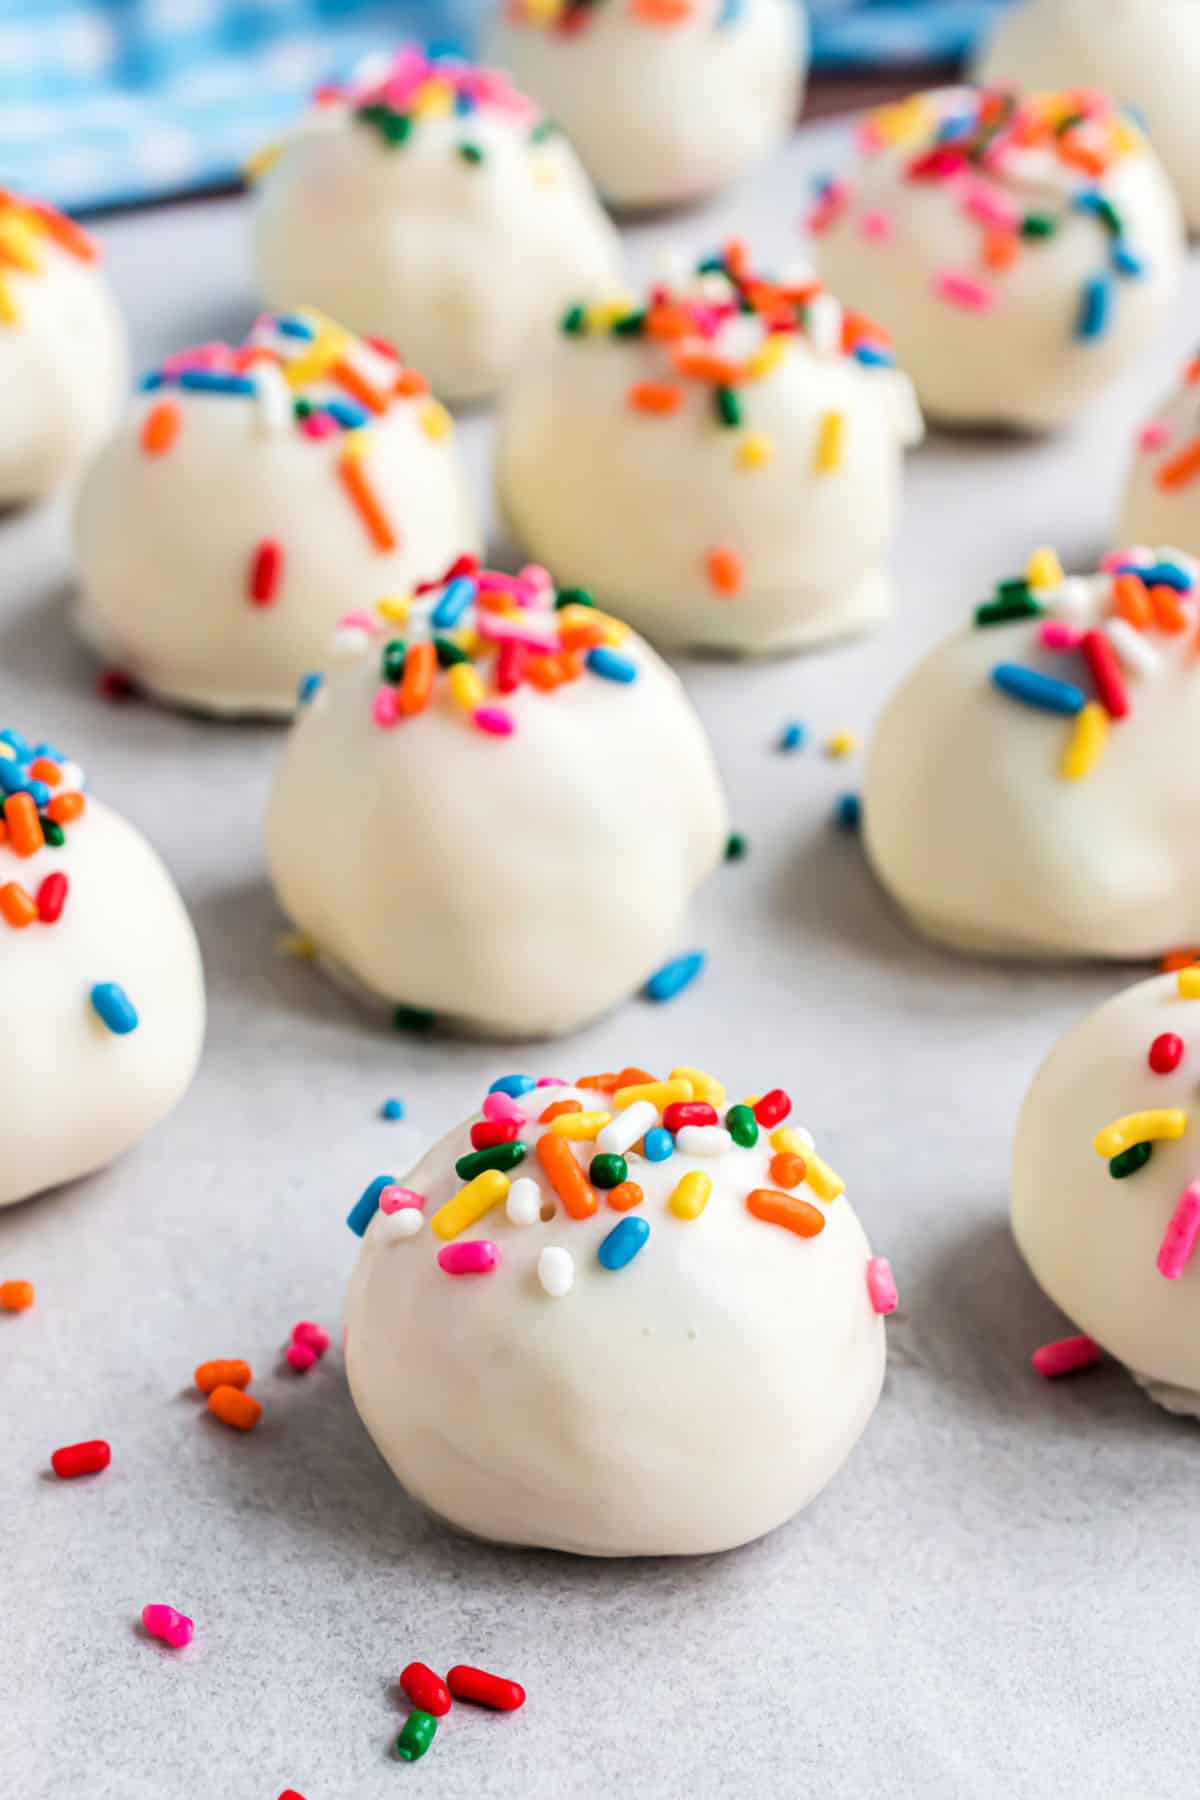 Funfetti truffles with white chocolate and sprinkles on parchment paper.